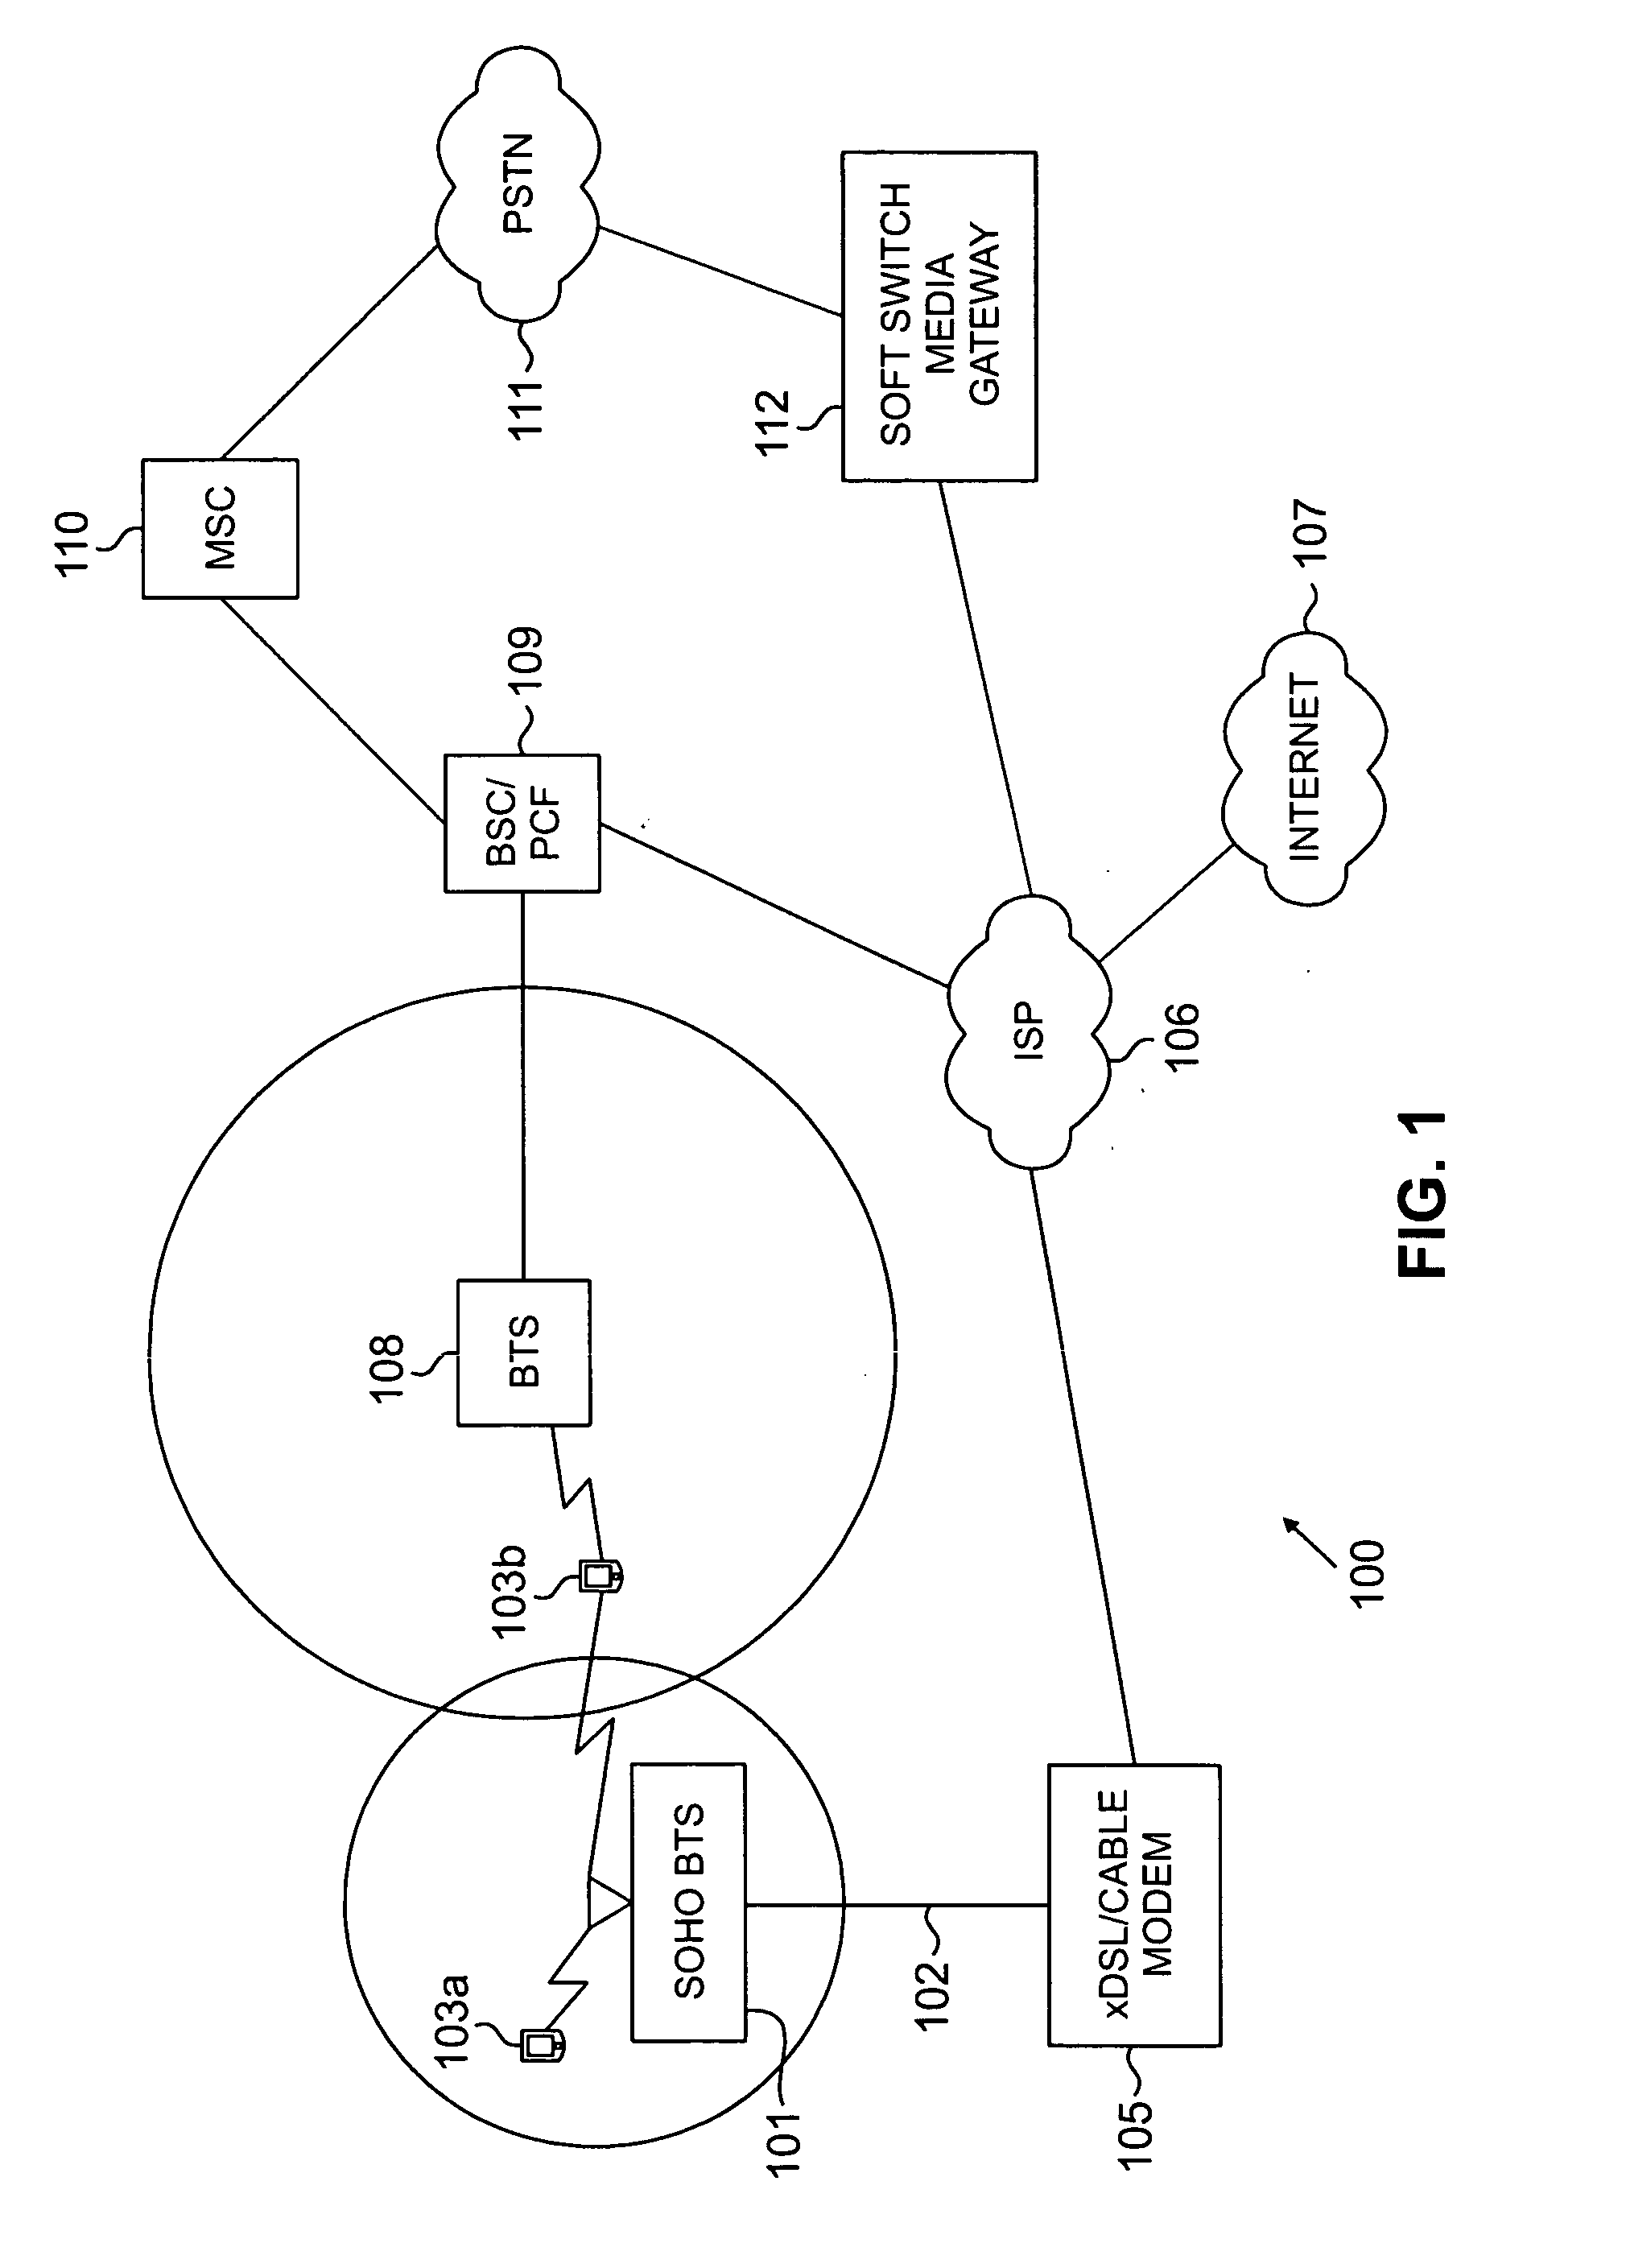 System and method for providing SOHO BTS coverage based on angle of arrival of mobile station signals